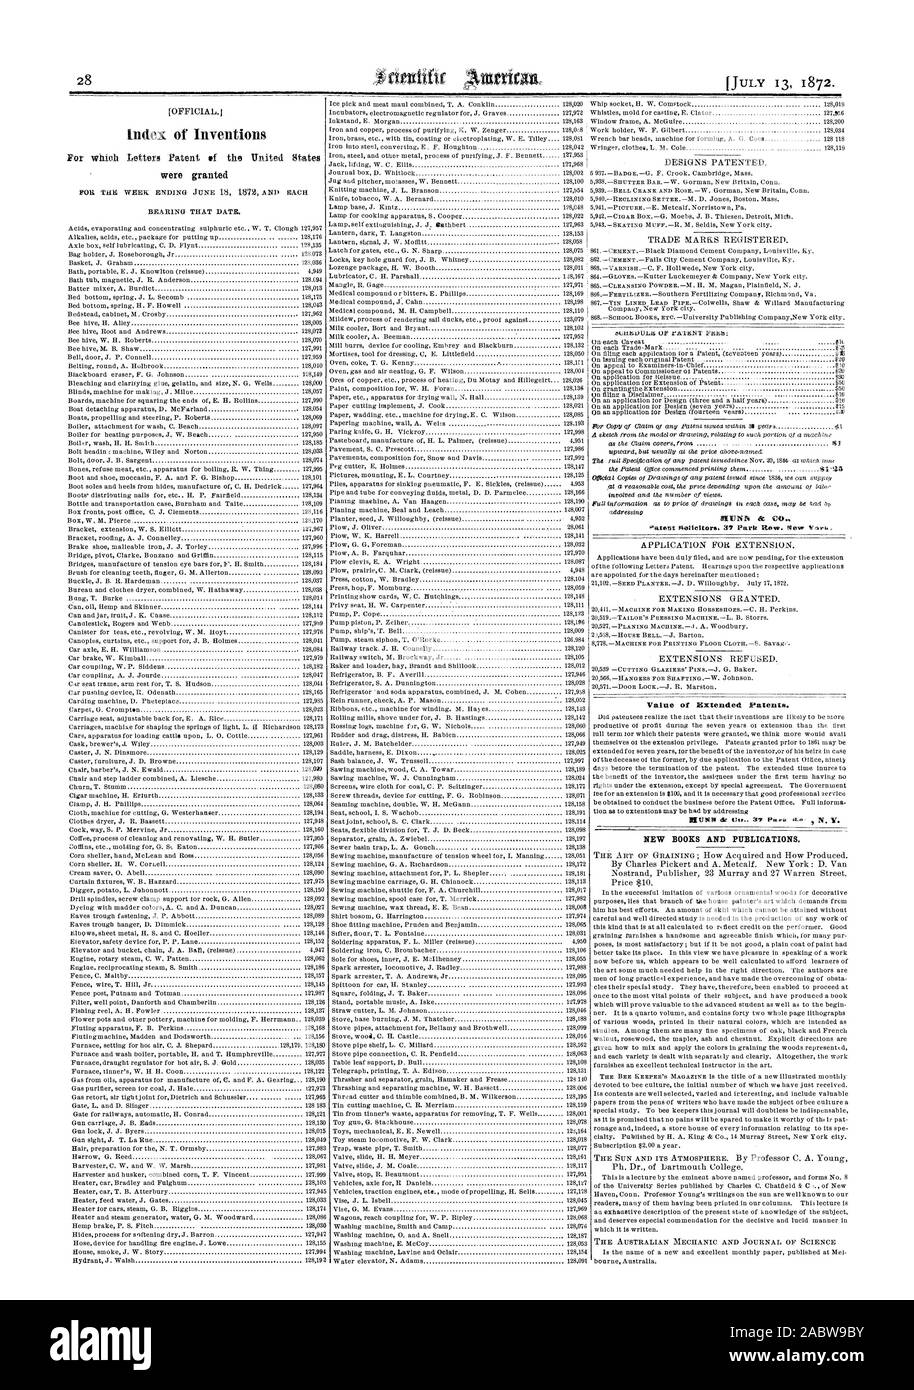 Index of Inventions Value of Extended Patents. NEW BOOKS AND PUBLICATIONS., scientific american, 1872-07-13 Stock Photo